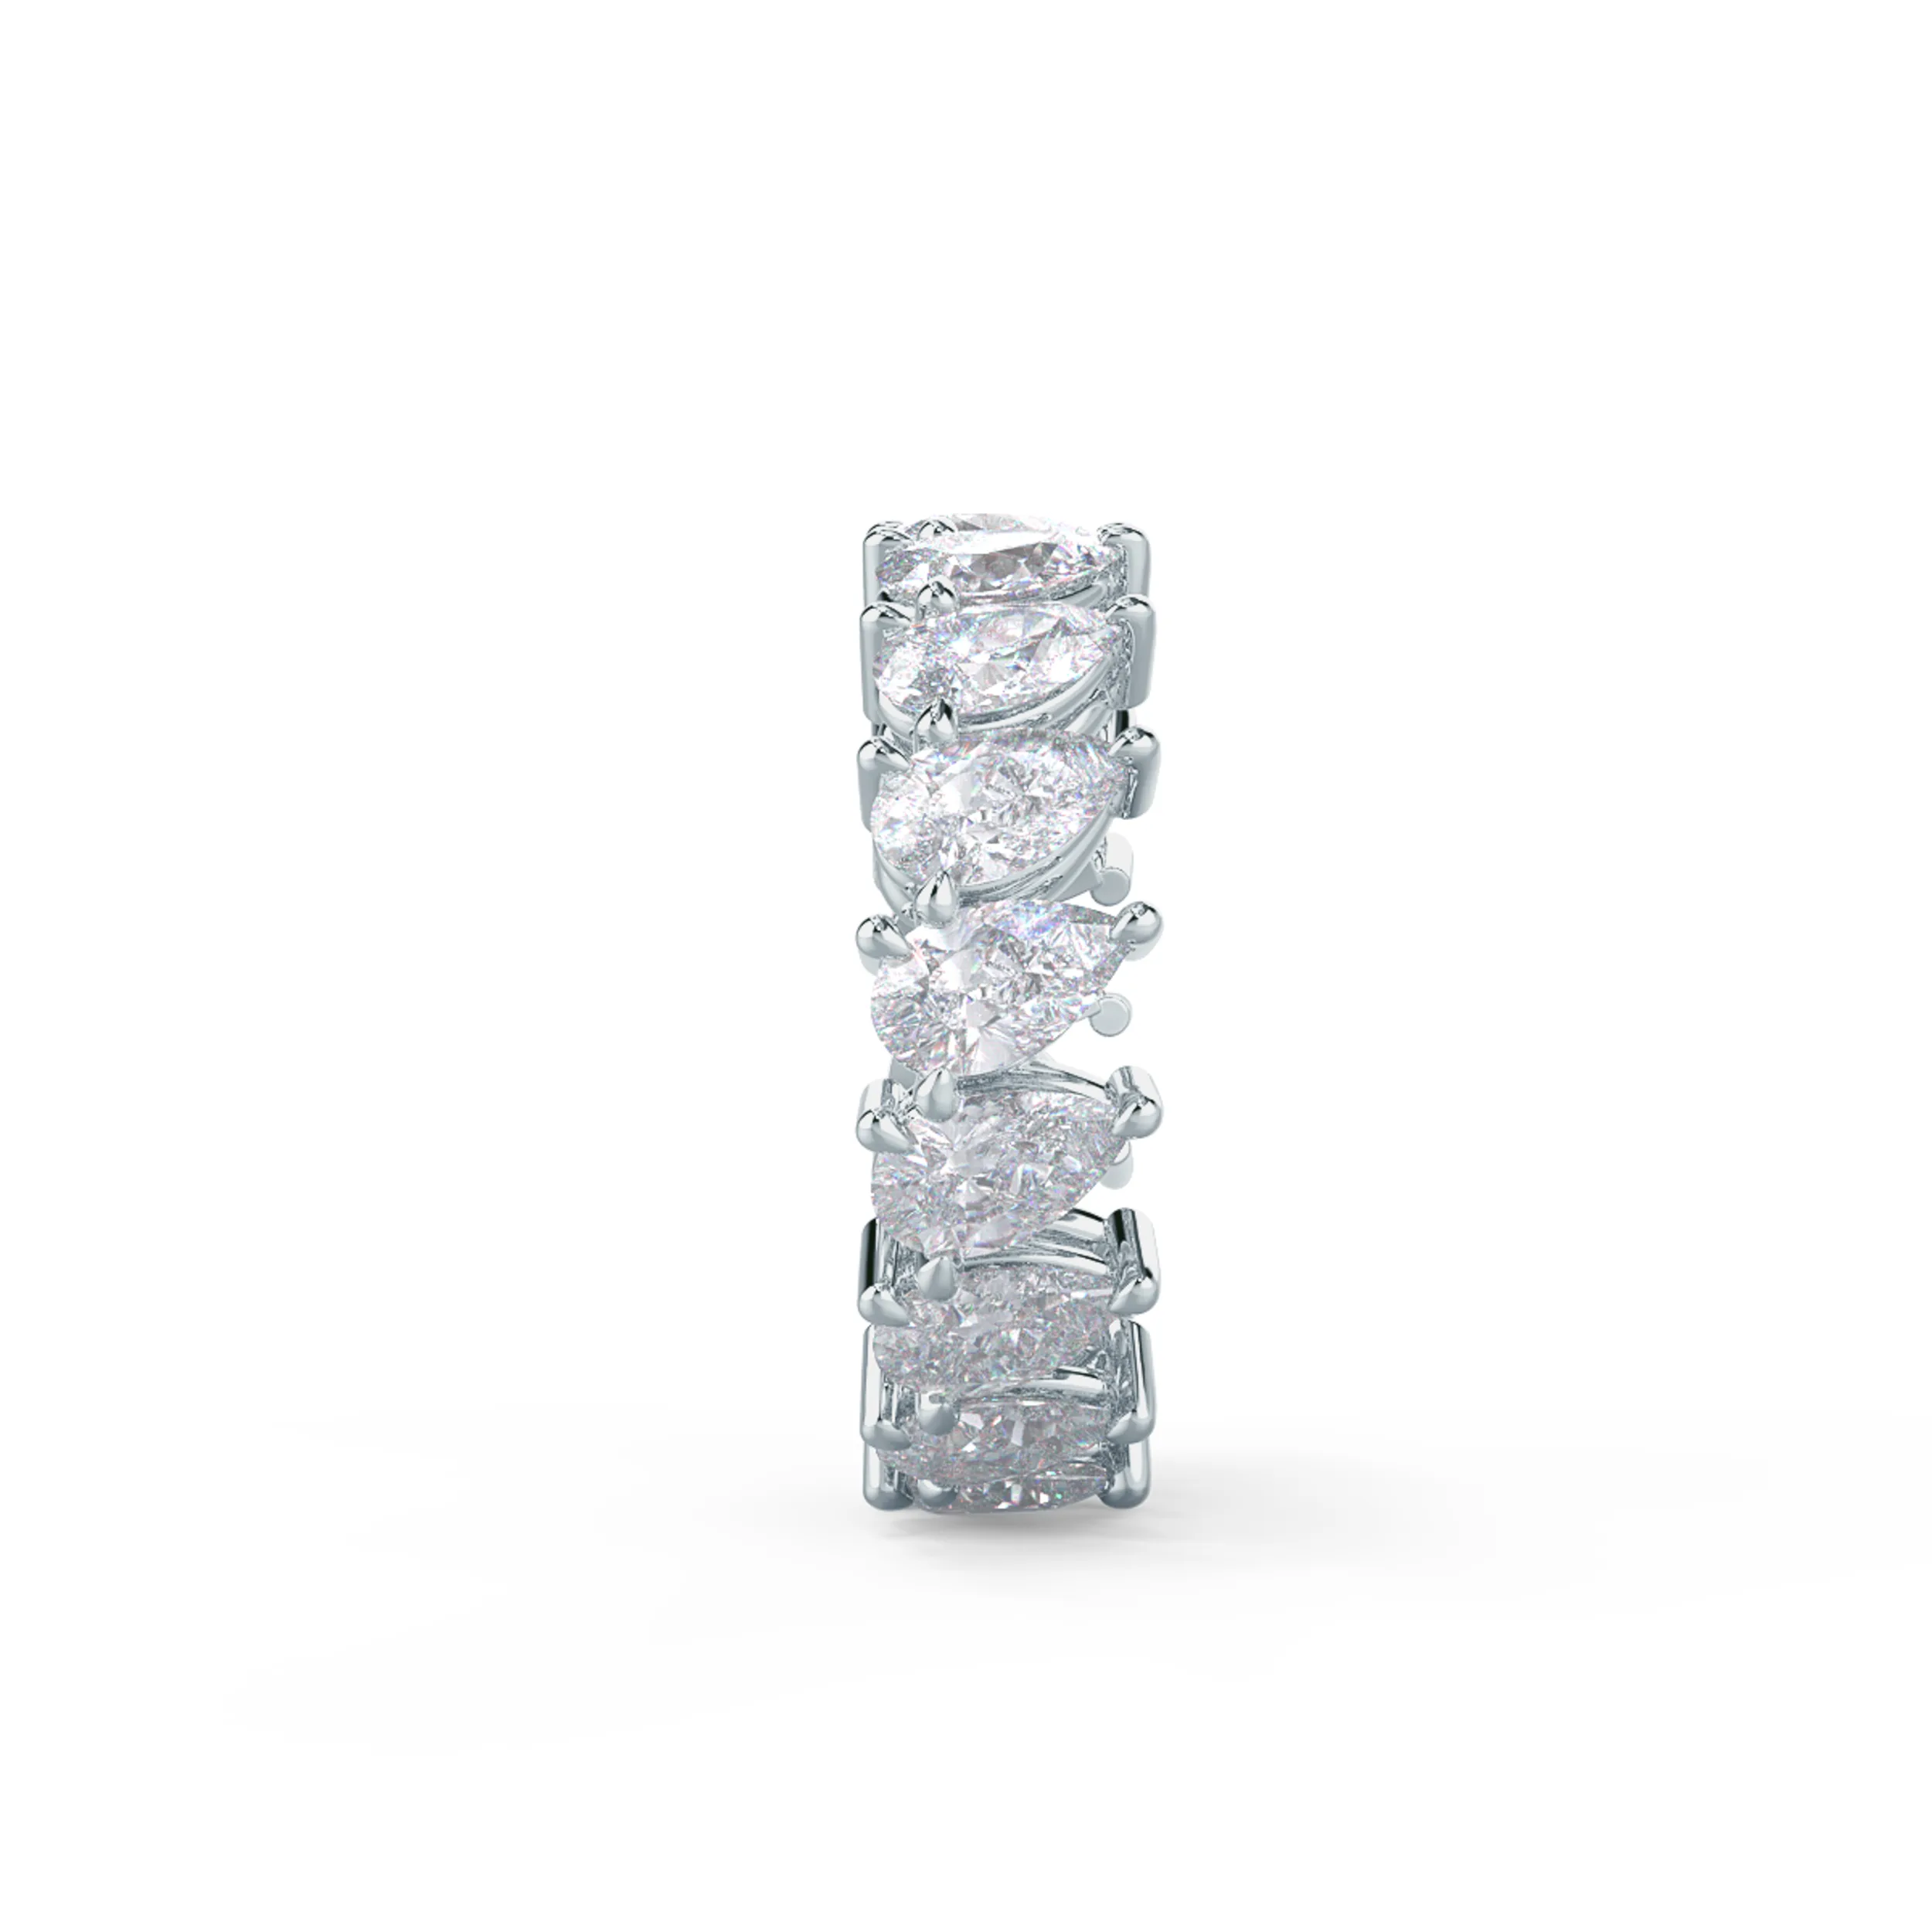 18k White Gold Pear Angled Eternity Band featuring Exceptional Quality 5.0 ctw Lab Created Diamonds (Side View)